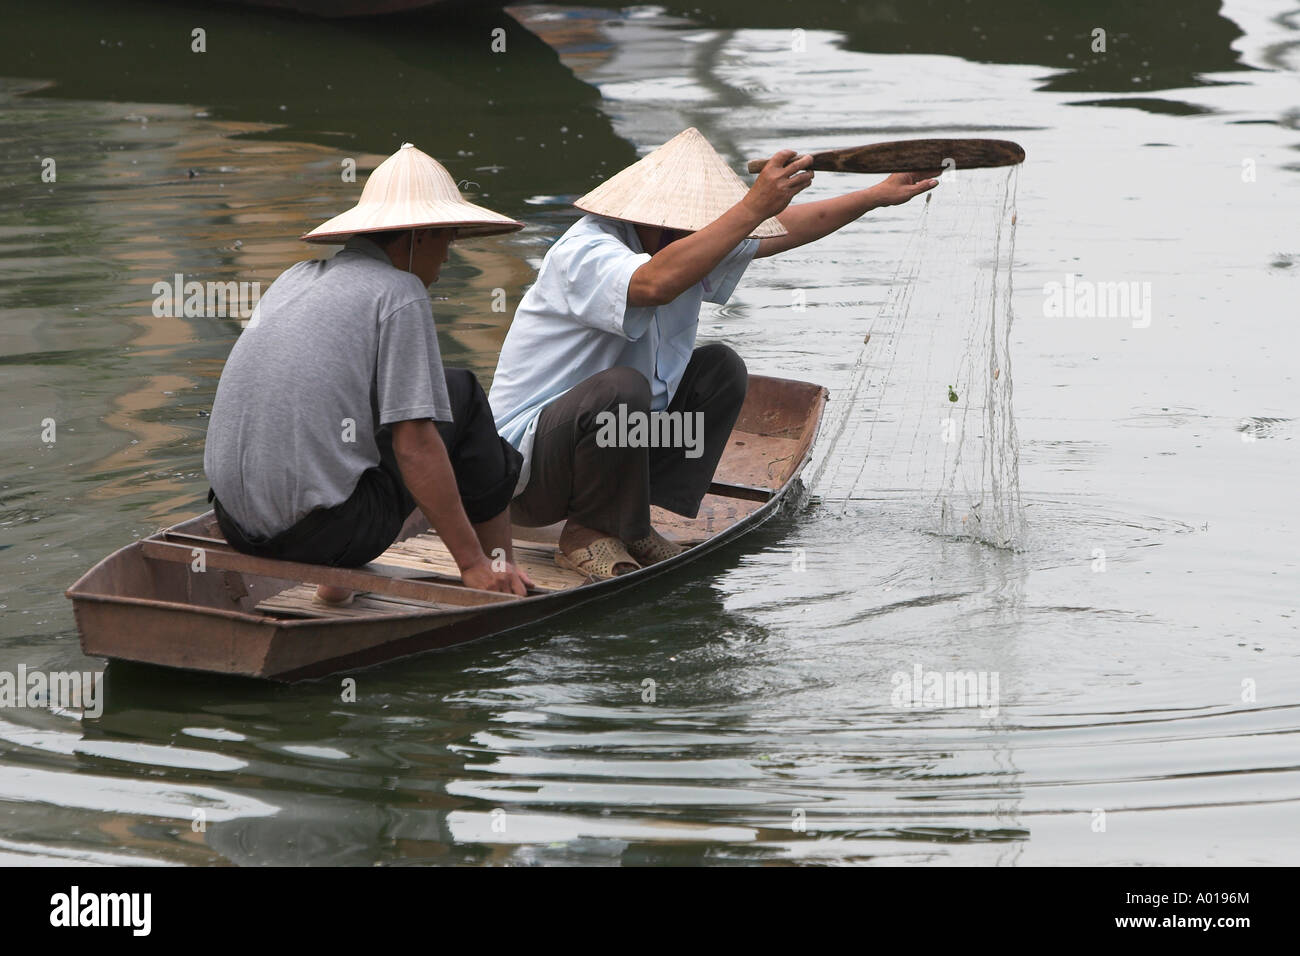 Two men fishing from small boat with net and paddle Yen River